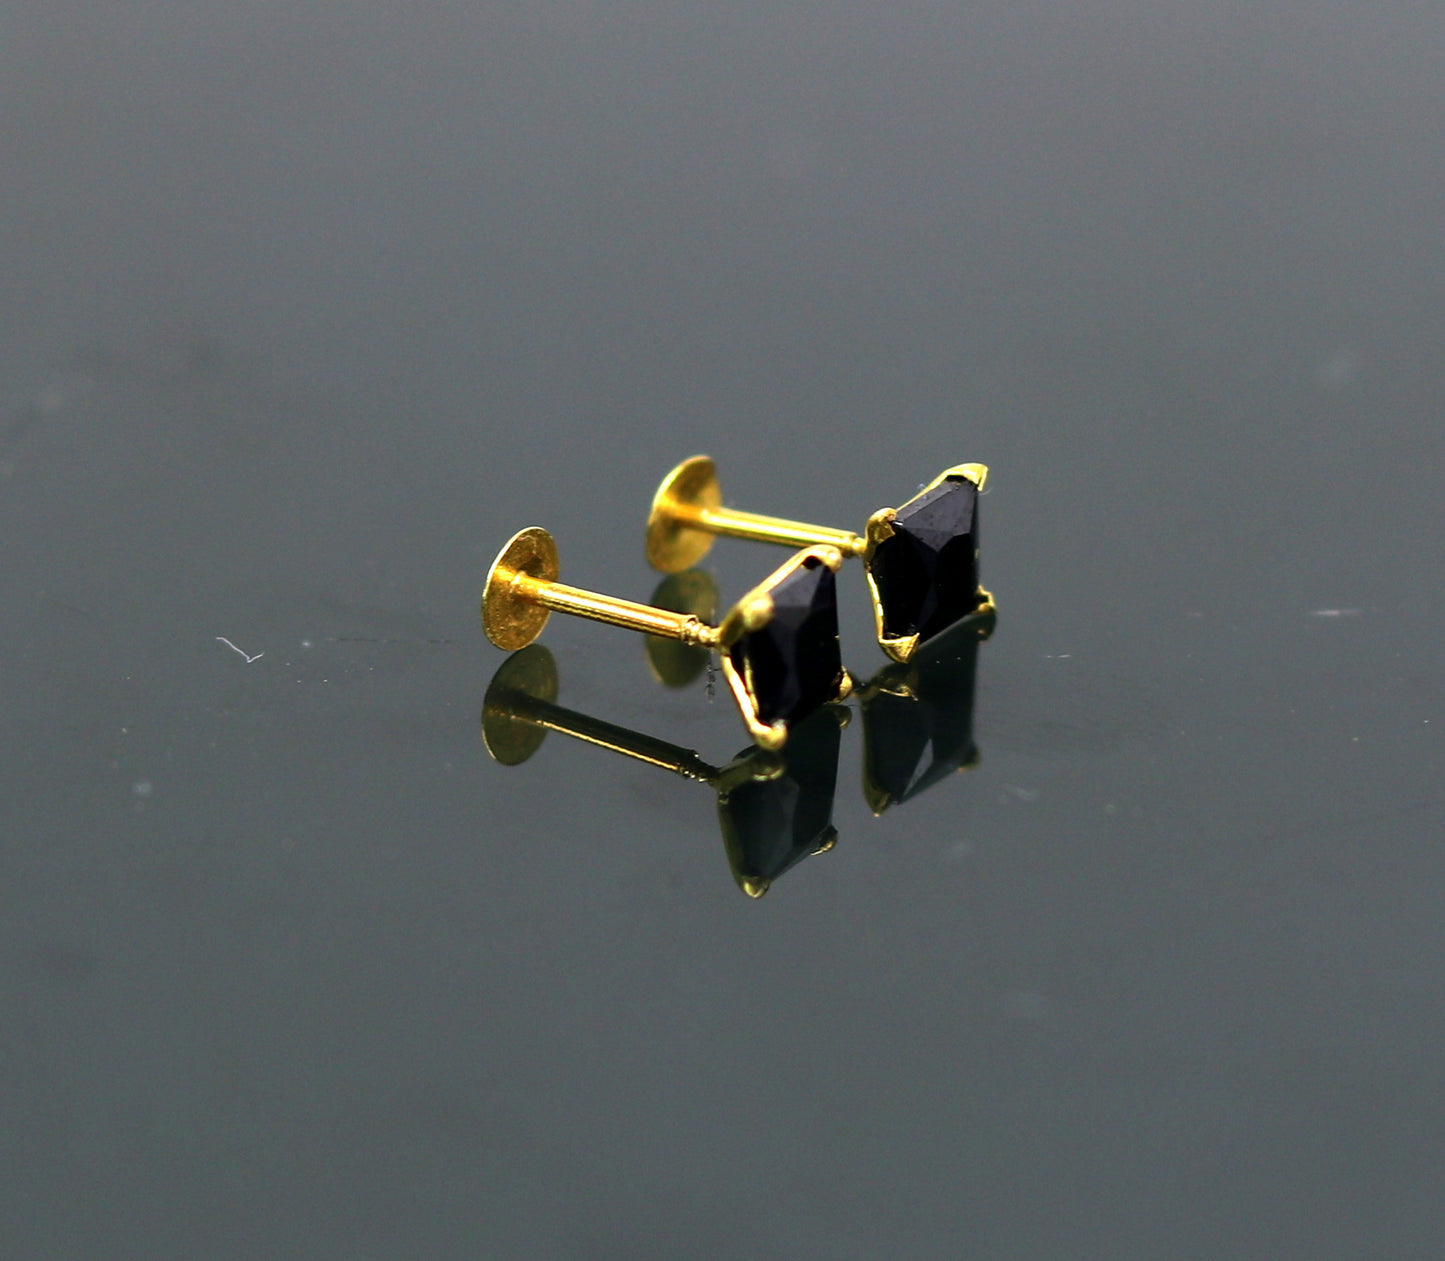 4mm 18kt yellow gold handmade single black stone stud earring, excellent light weight daily use customized gifting unisex jewelry er106 - TRIBAL ORNAMENTS